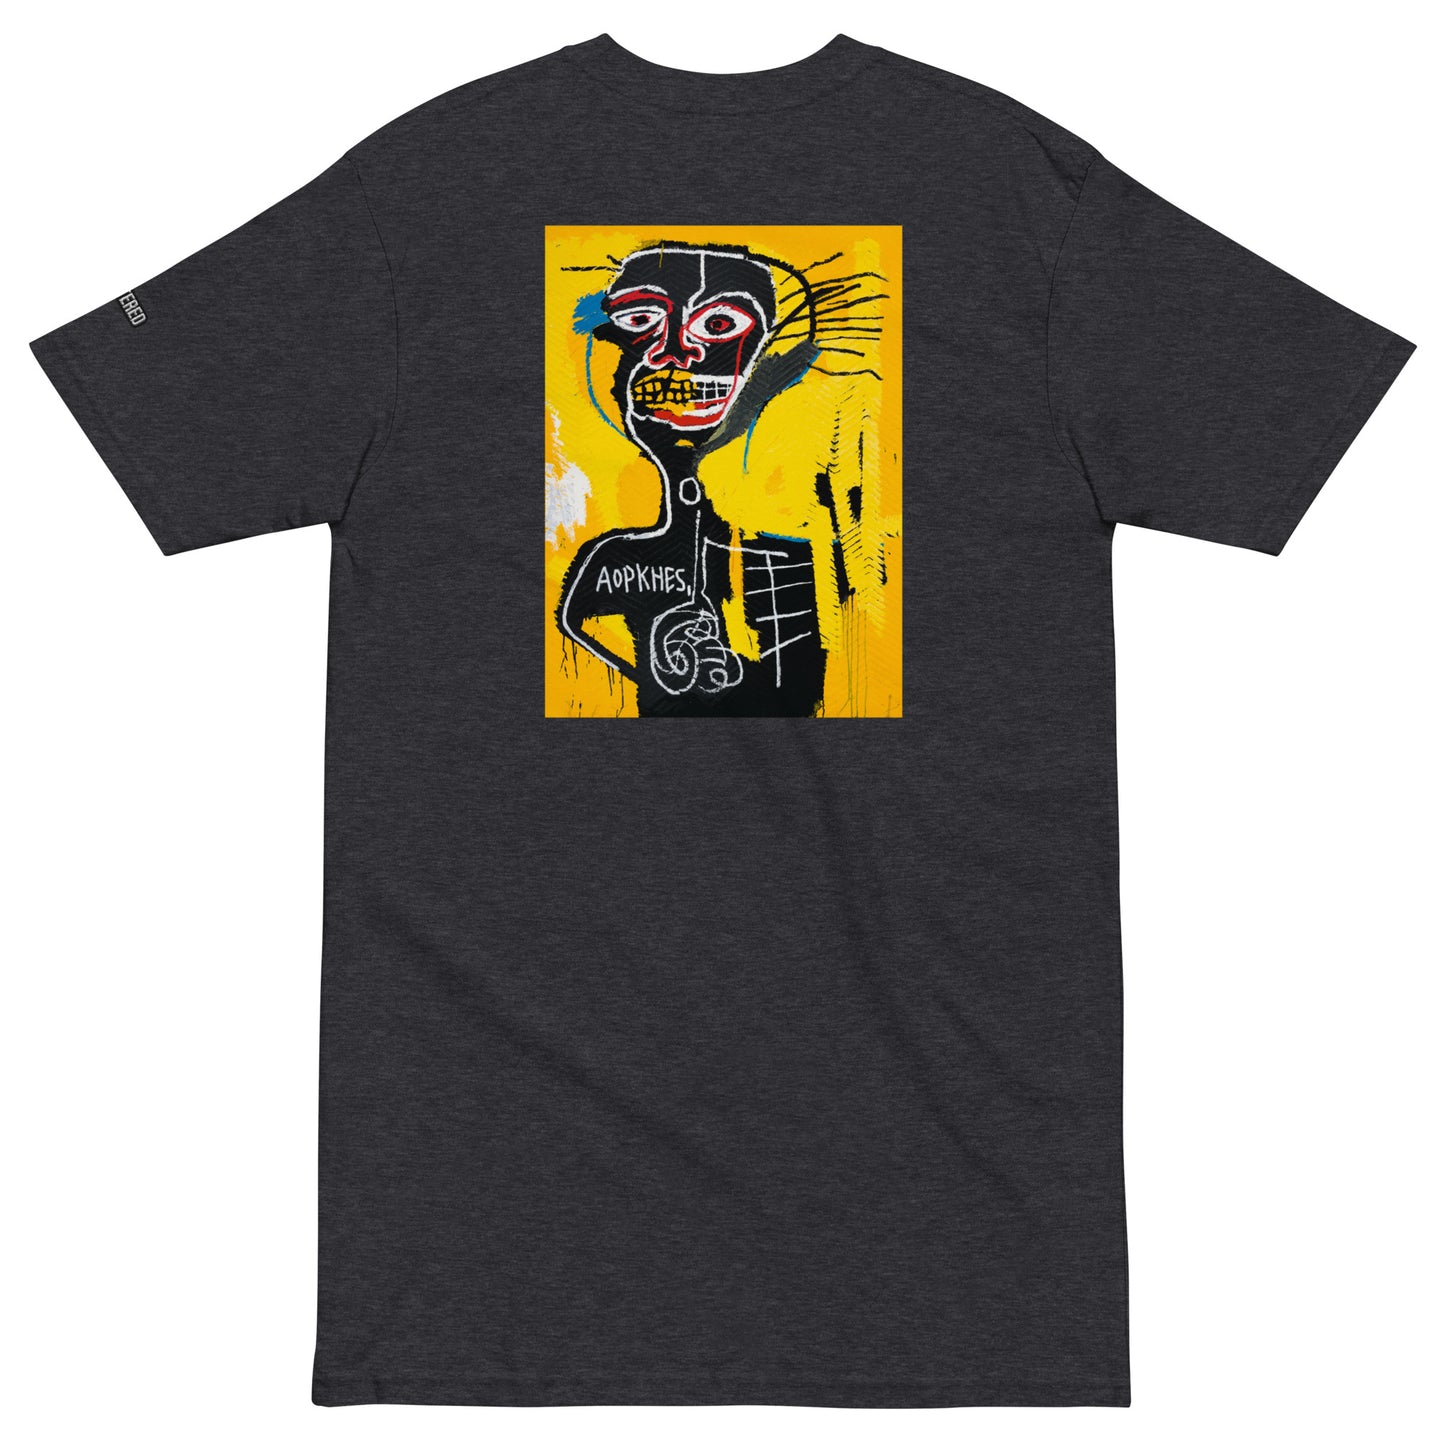 Jean-Michel Basquiat "Cabeza" Artwork Embroidered + Printed Premium Charcoal Grey Streetwear T-shirt Scattered